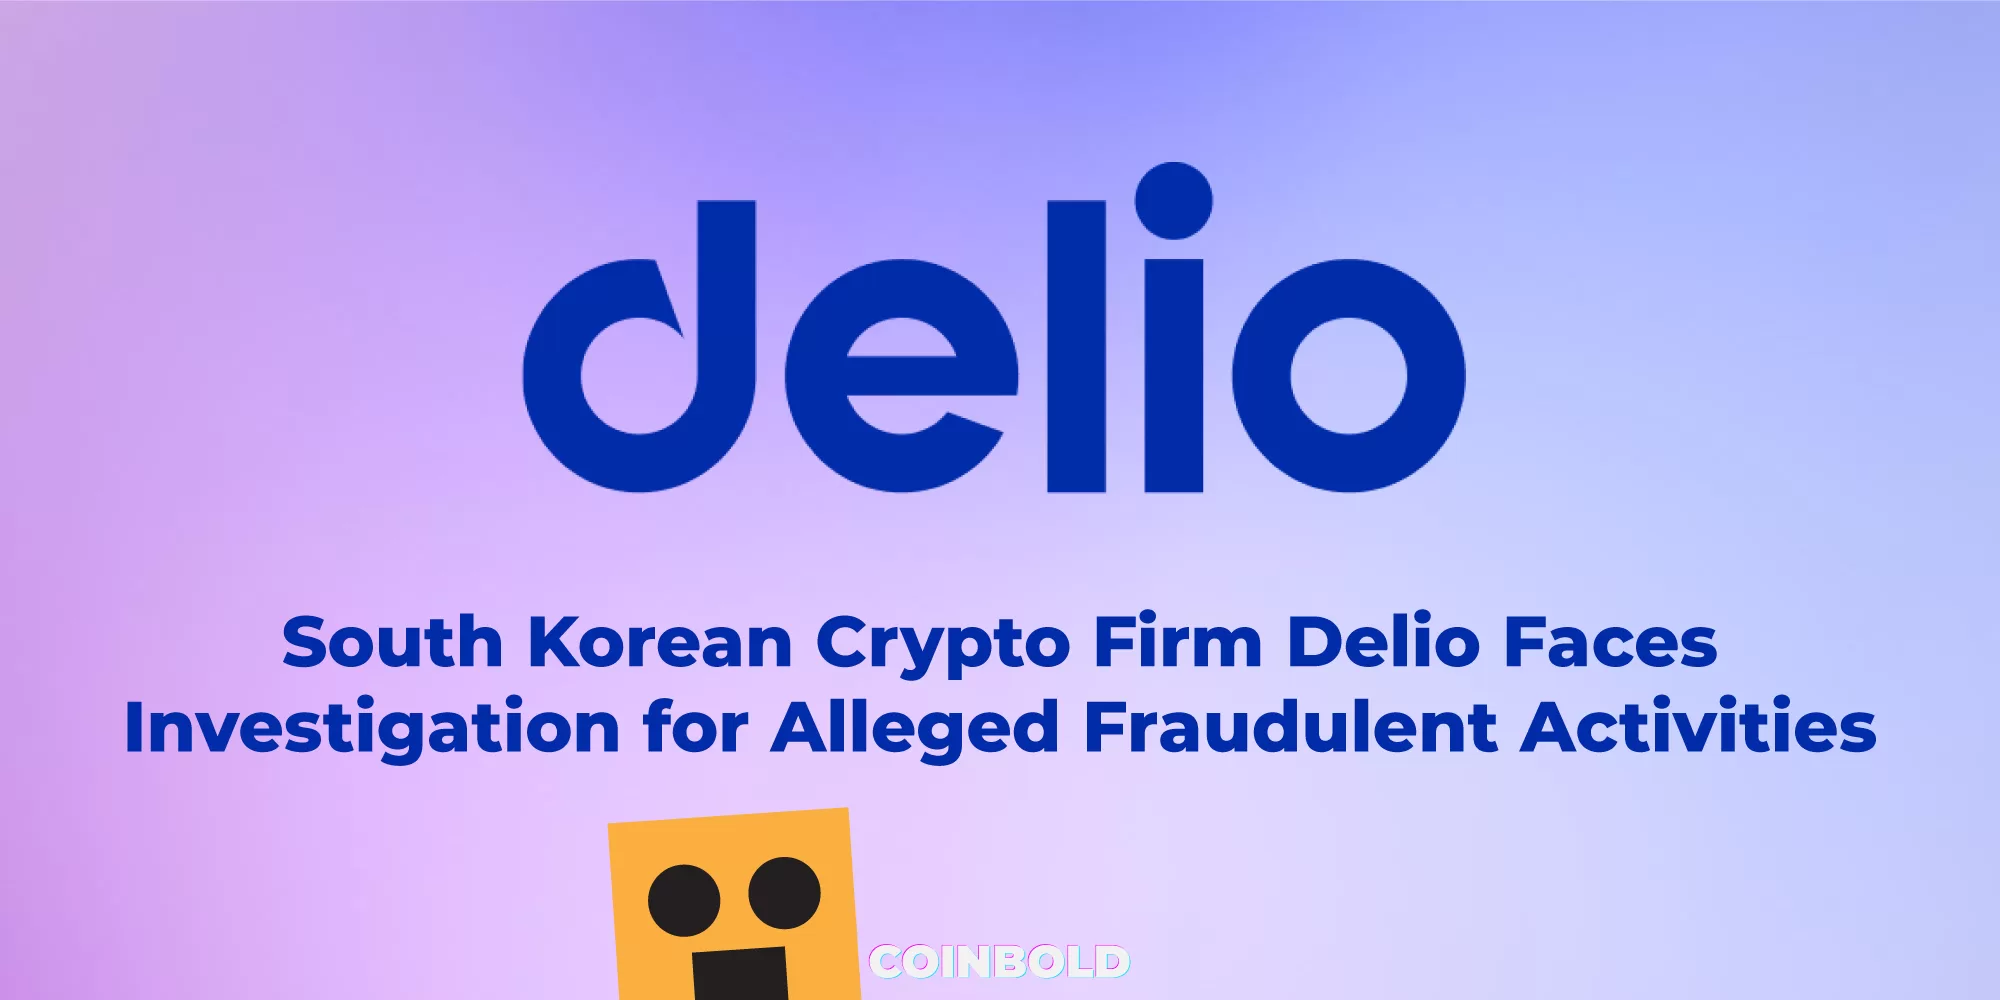 South Korean Crypto Firm Delio Faces Investigation for Alleged Fraudulent Activities